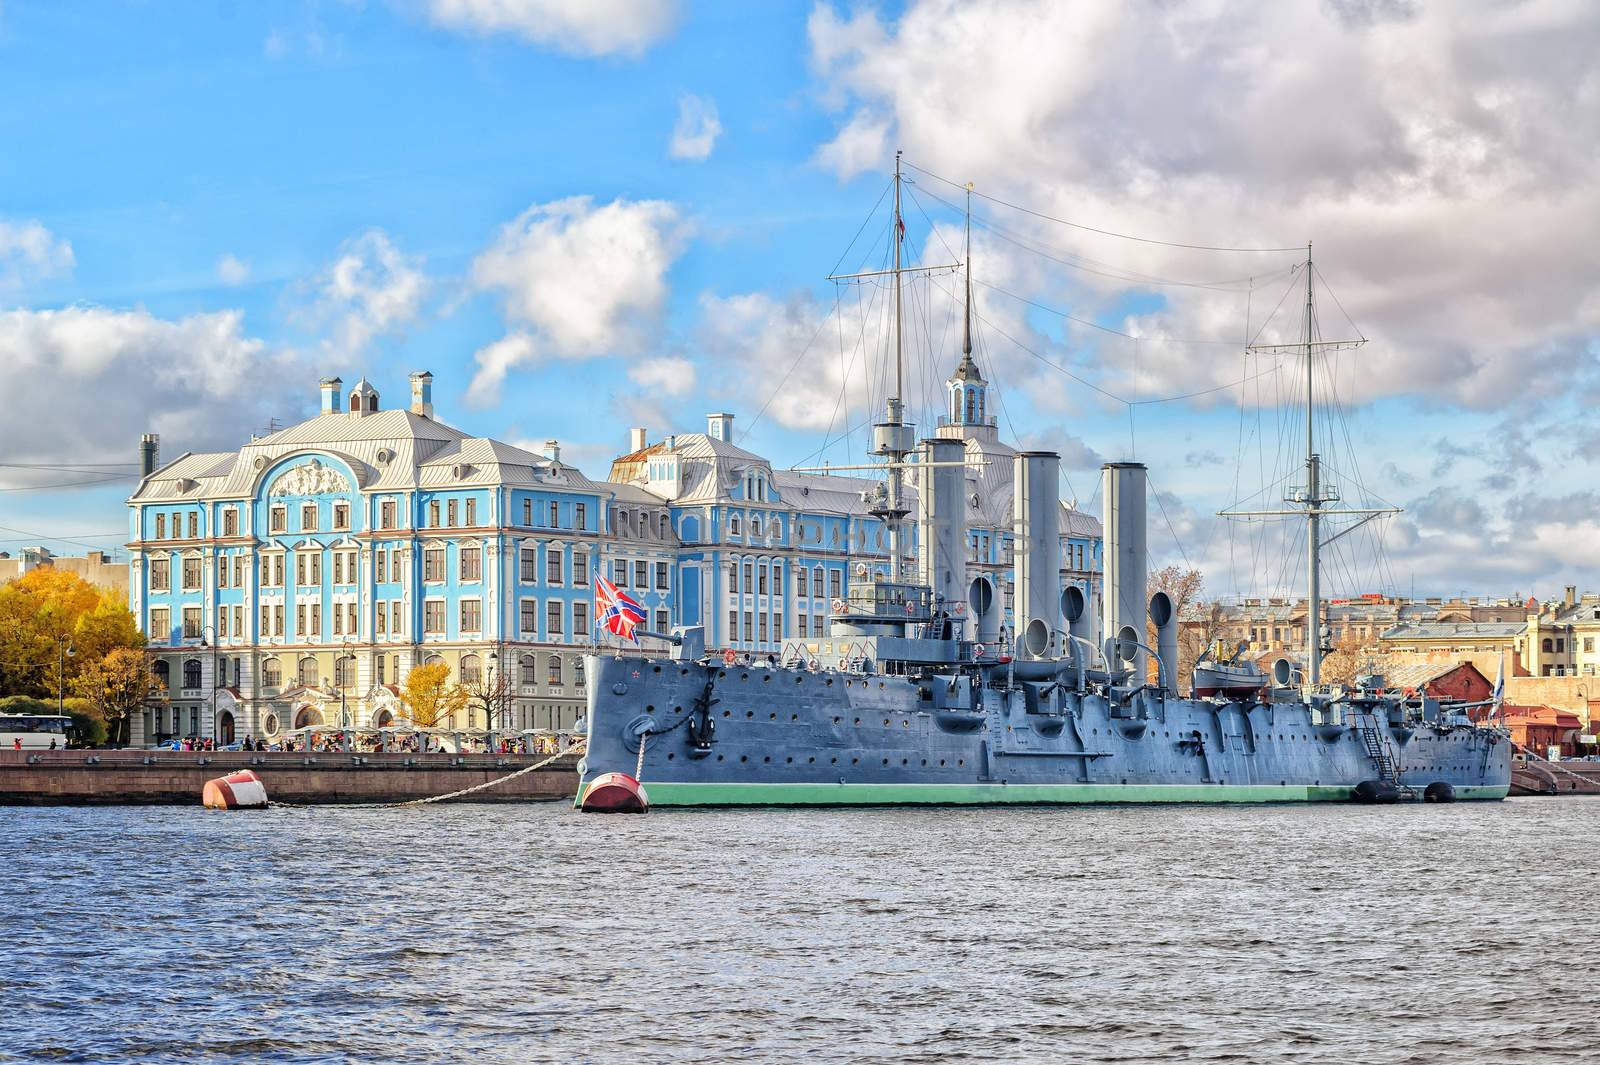 Aurora Cruiser played an important role in October Revolution 1917, St Petersburg, Russia